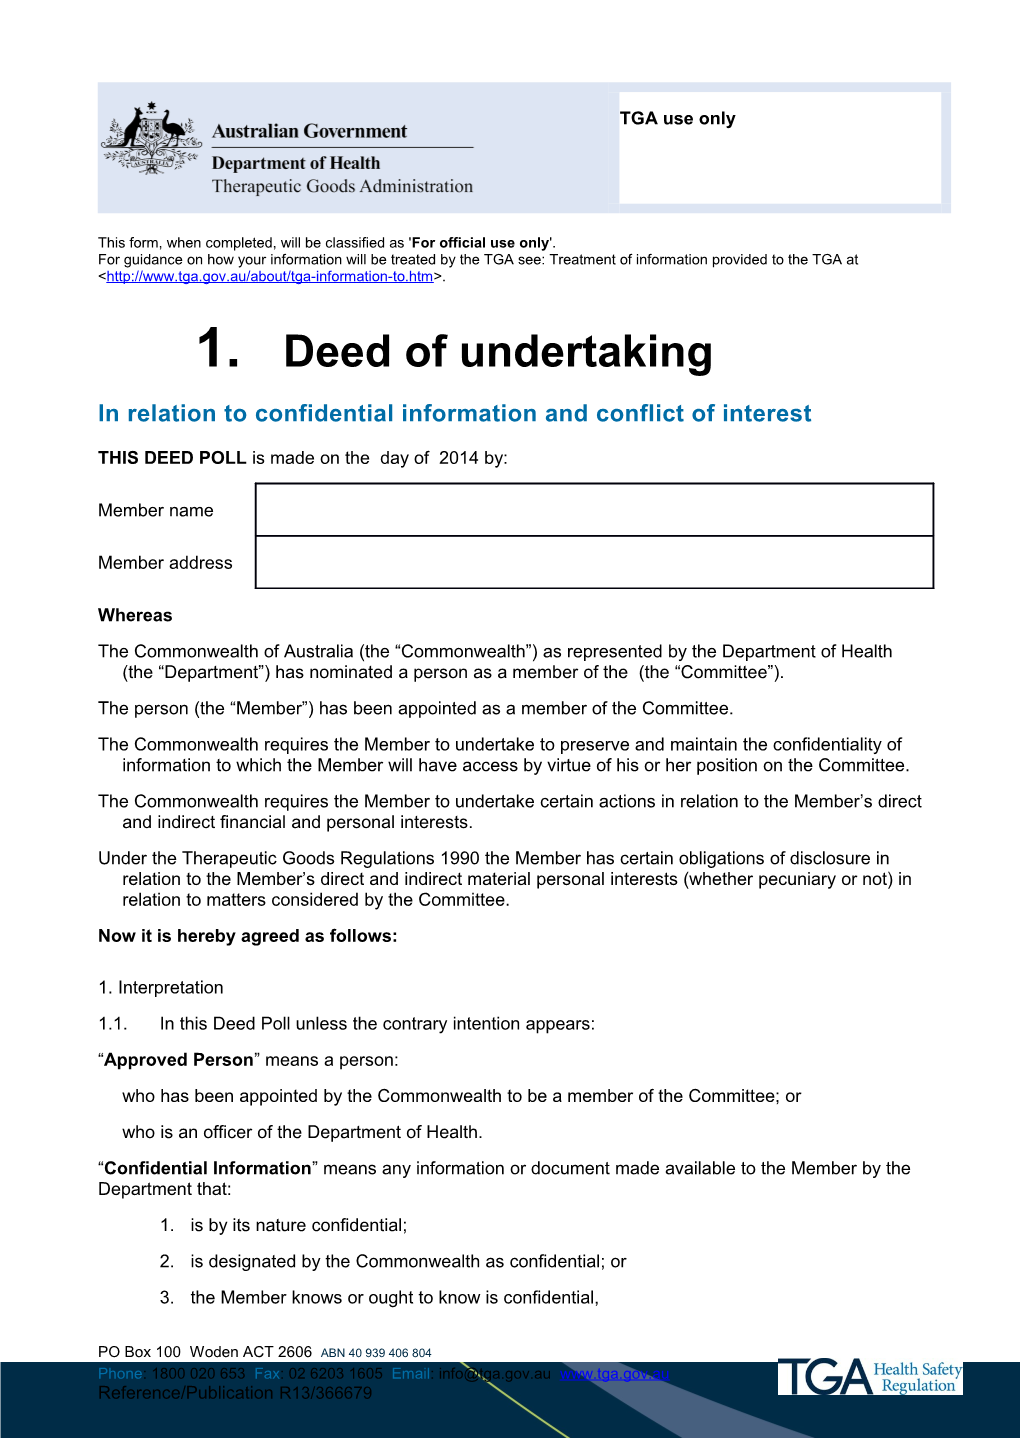 Deed of Undertaking in Relation to Confidential Information and Conflict of Interest